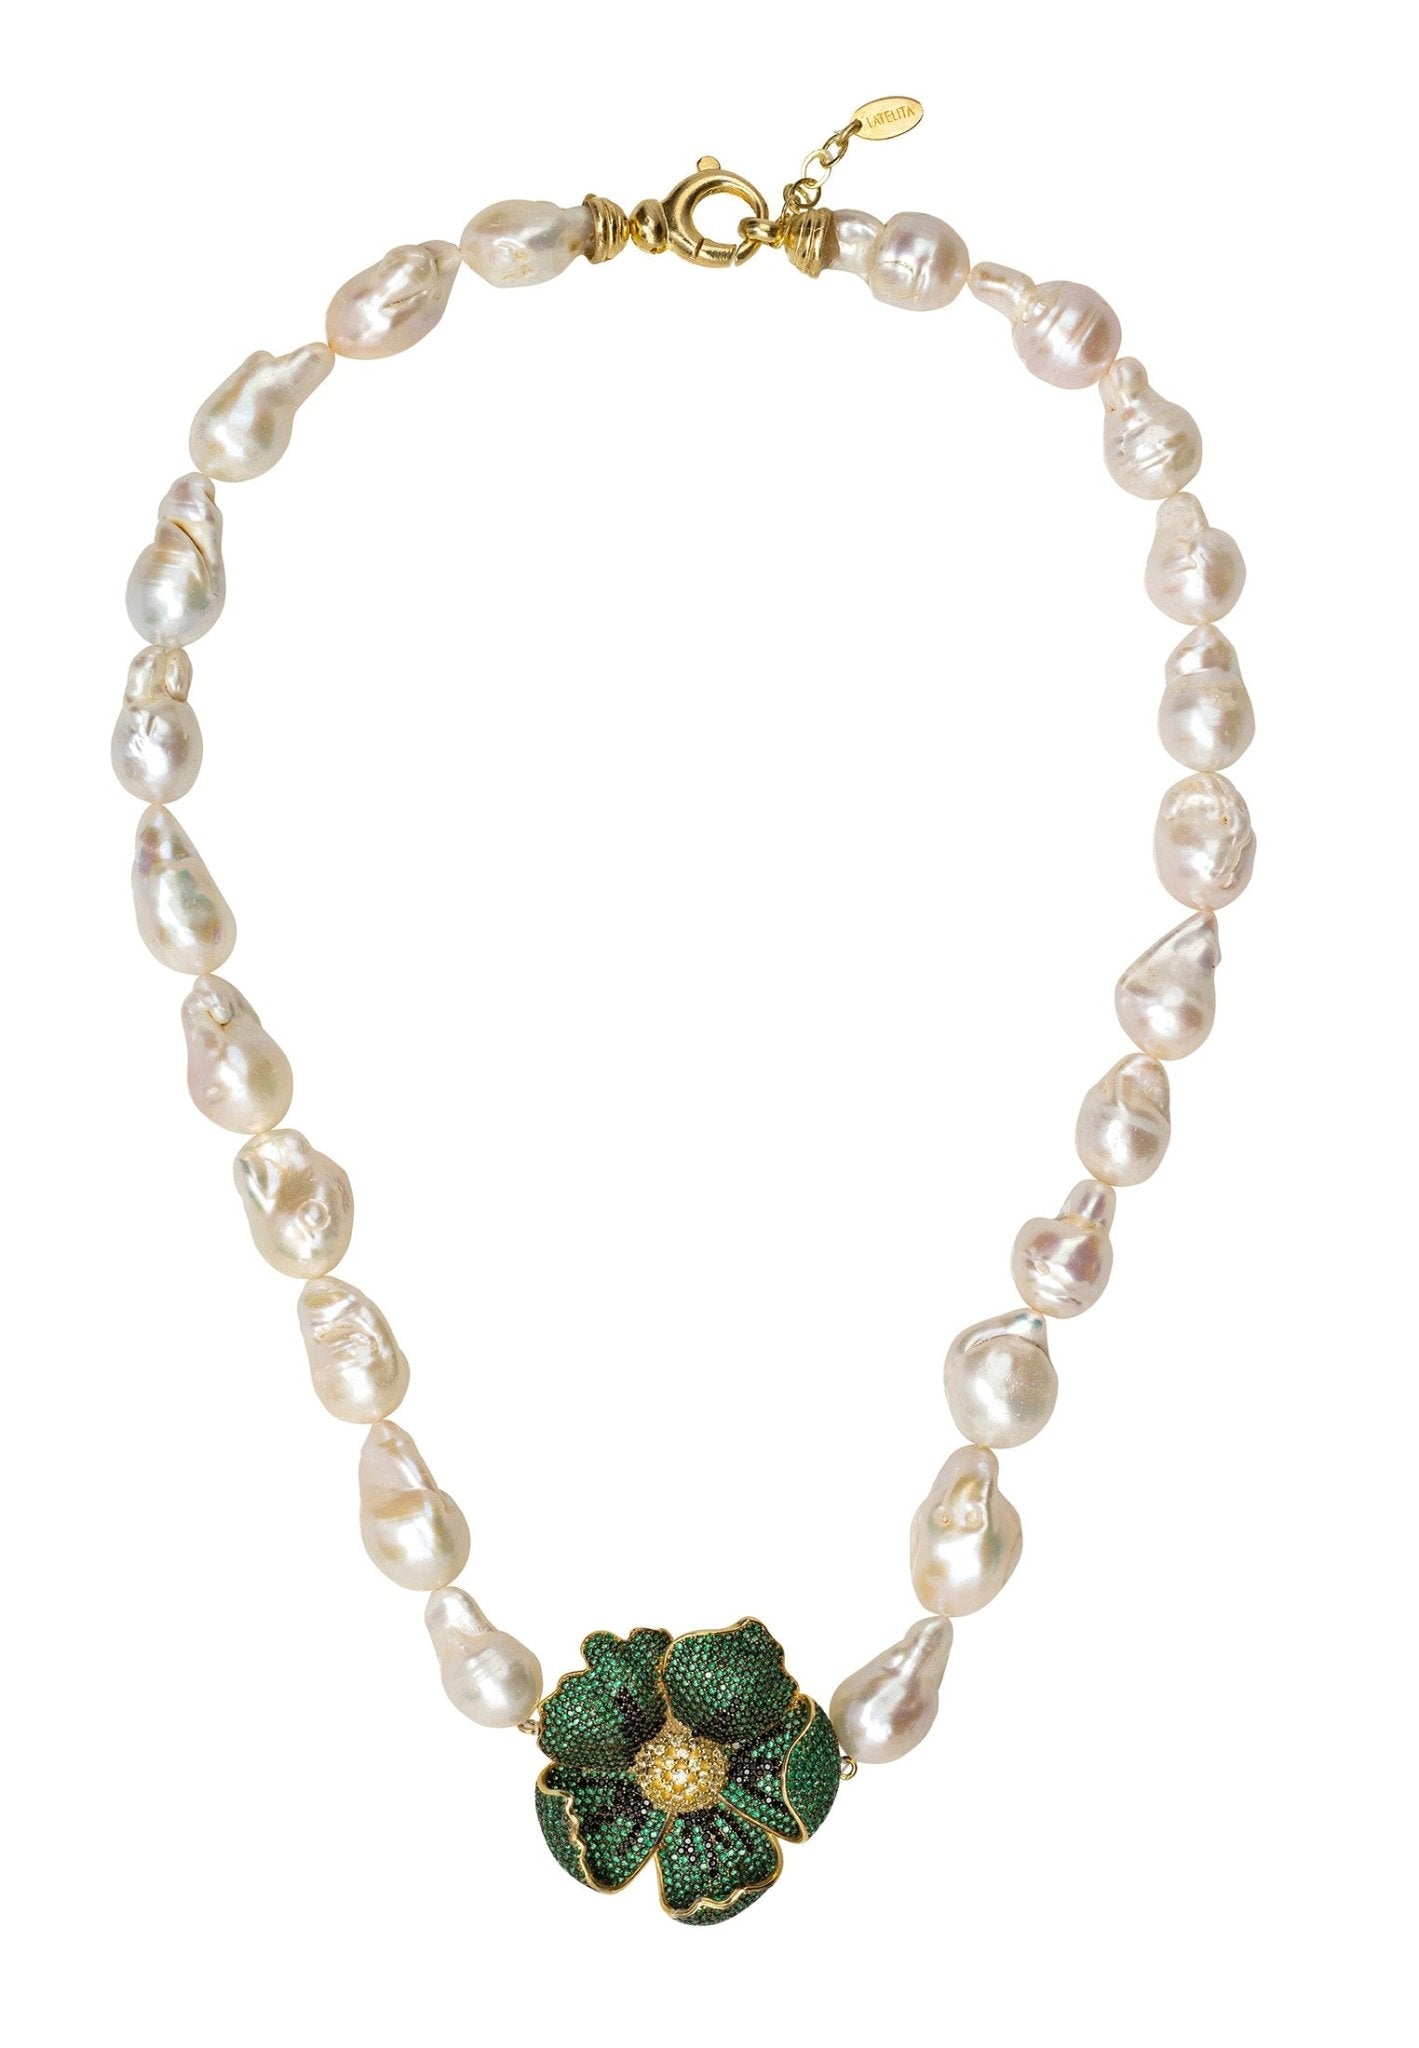 Poppy Flower Baroque Pearl Necklace Emerald Green Gold - LATELITA Necklaces